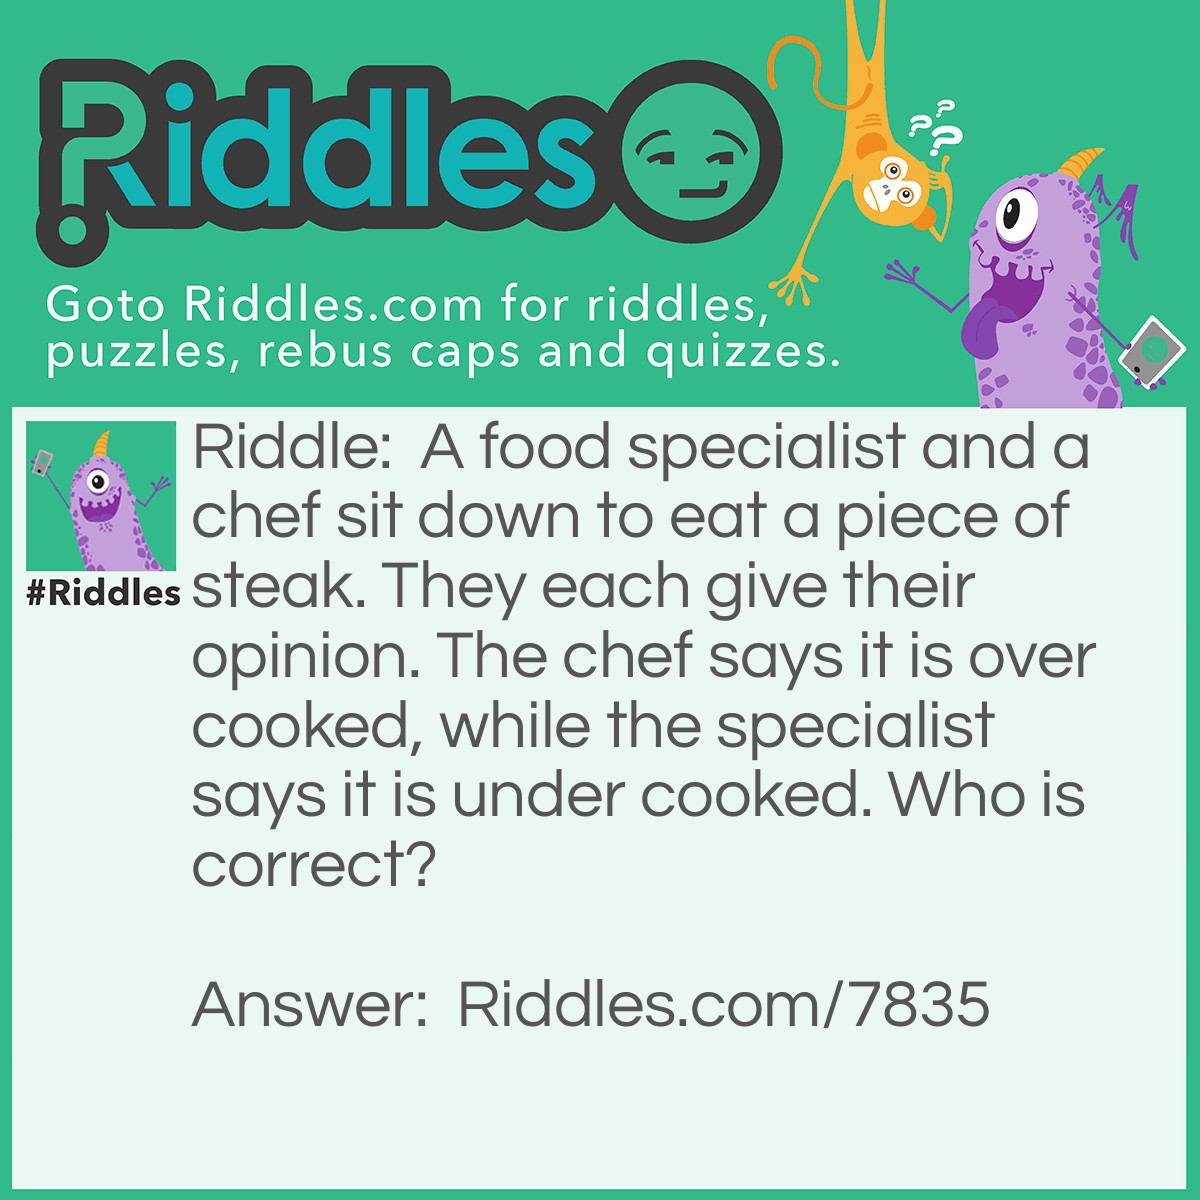 Riddle: A food specialist and a chef sit down to eat a piece of steak. They each give their opinion. The chef says it is over cooked, while the specialist says it is under cooked. Who is correct? Answer: There is no right answer. It is an opinion.